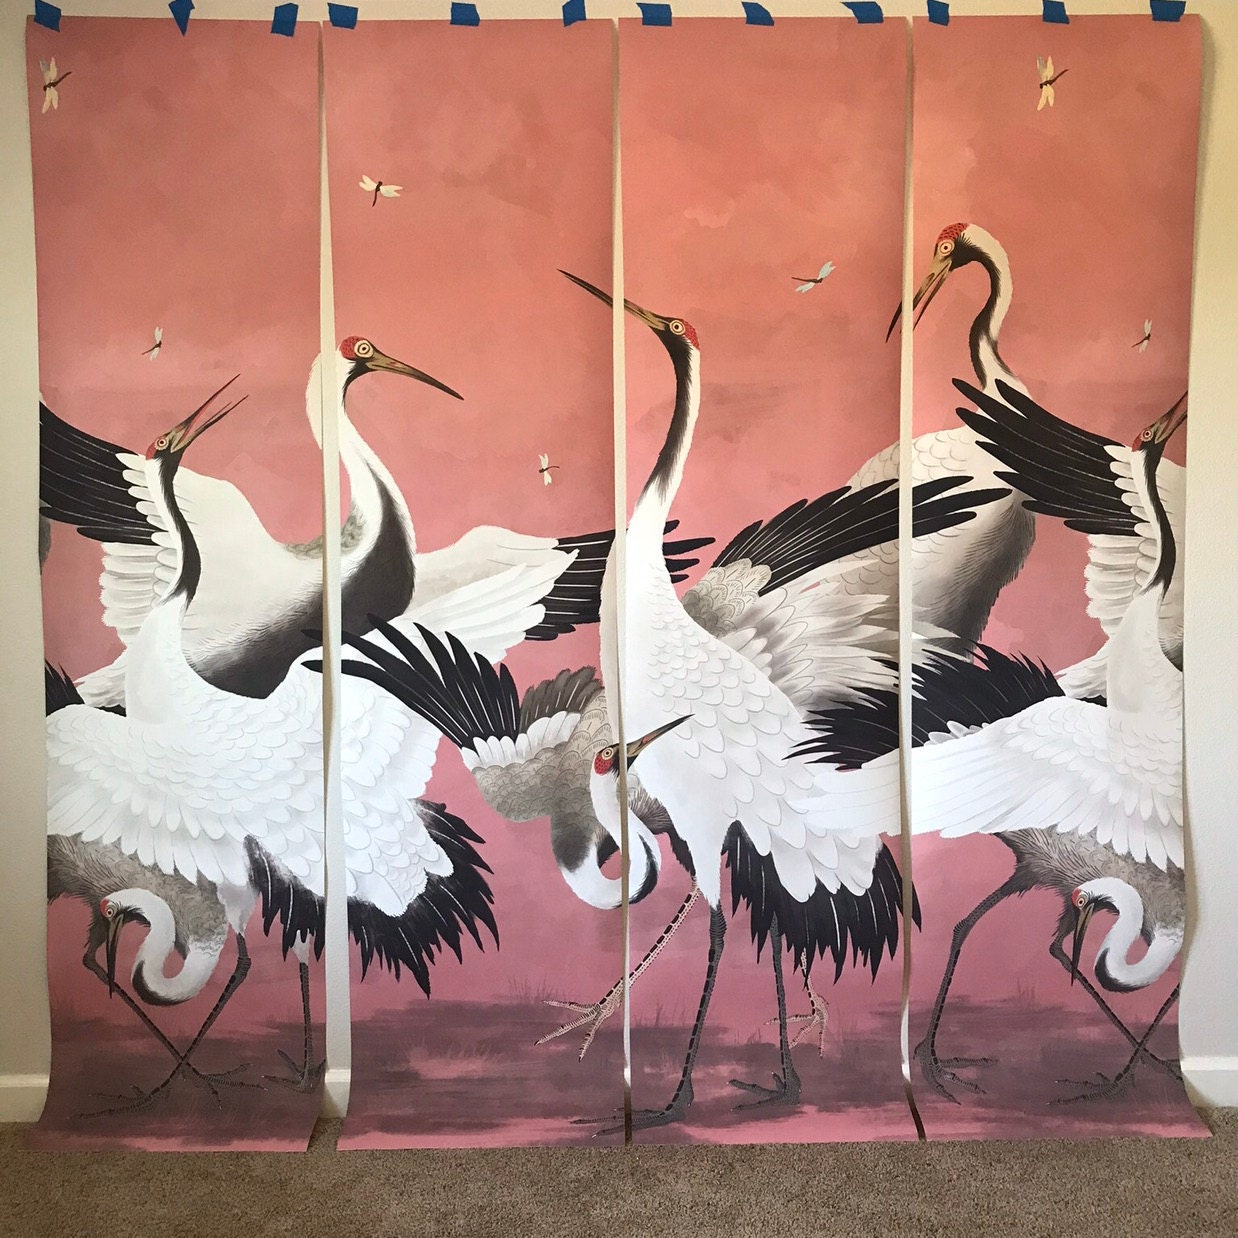 Heron Print Wallpaper, Removable Peel and Stick Mural, Japanese Gucci